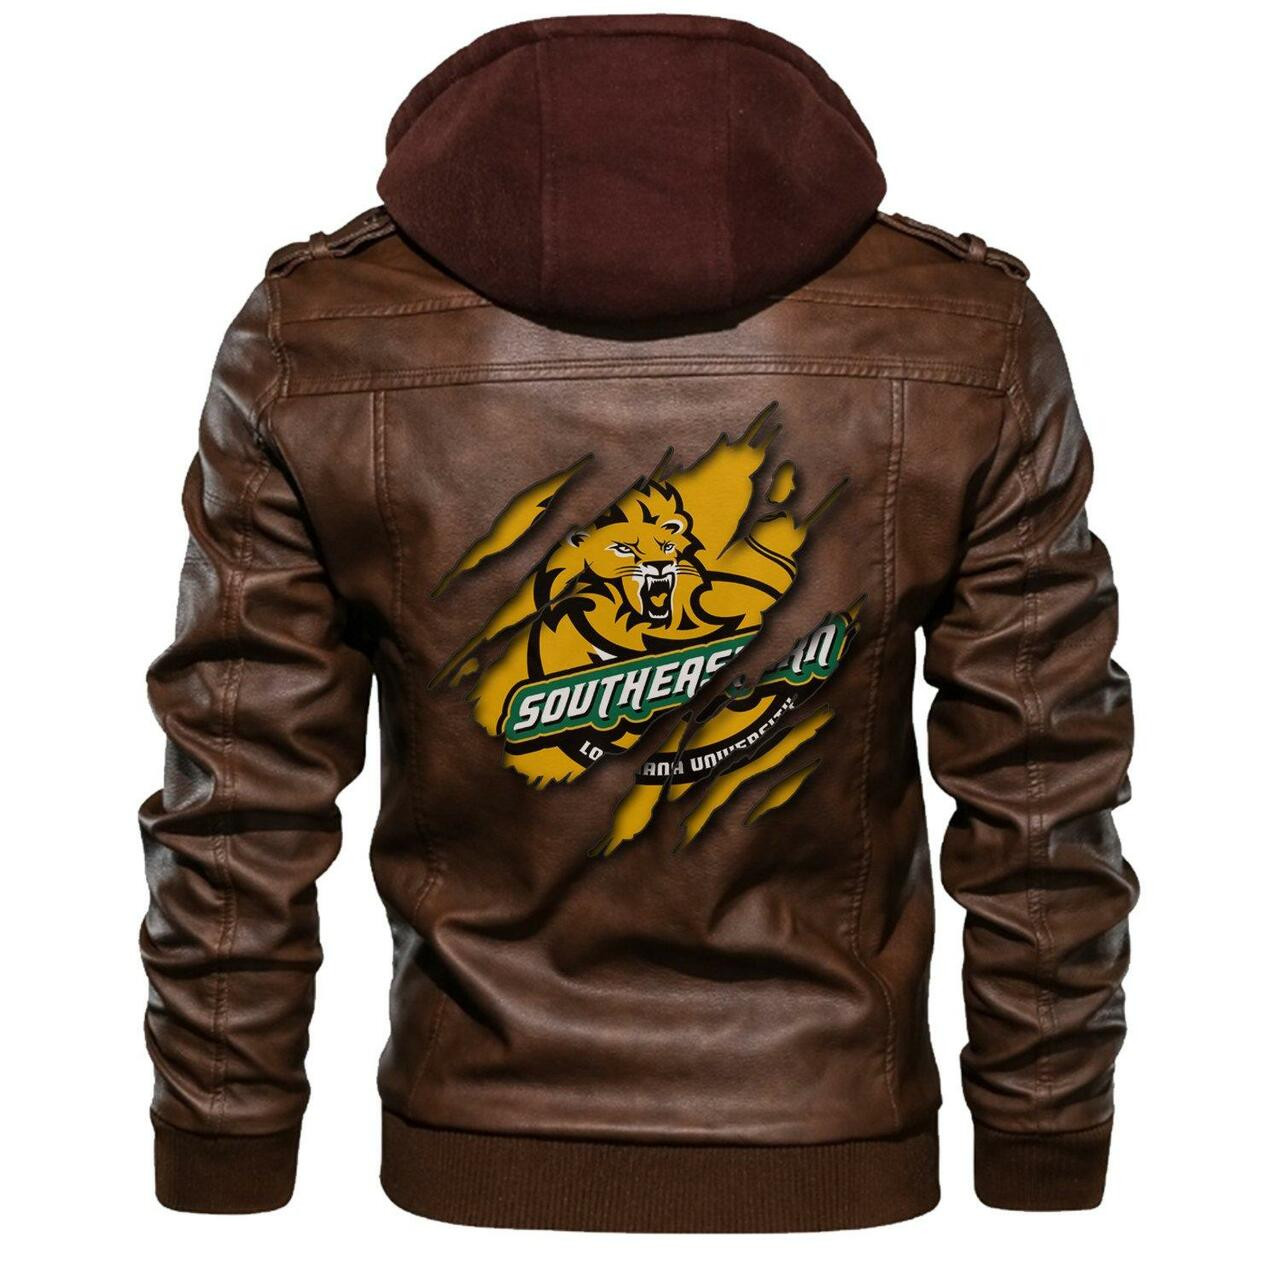 If you're looking for a new leather jacket this season - keep reading! 47